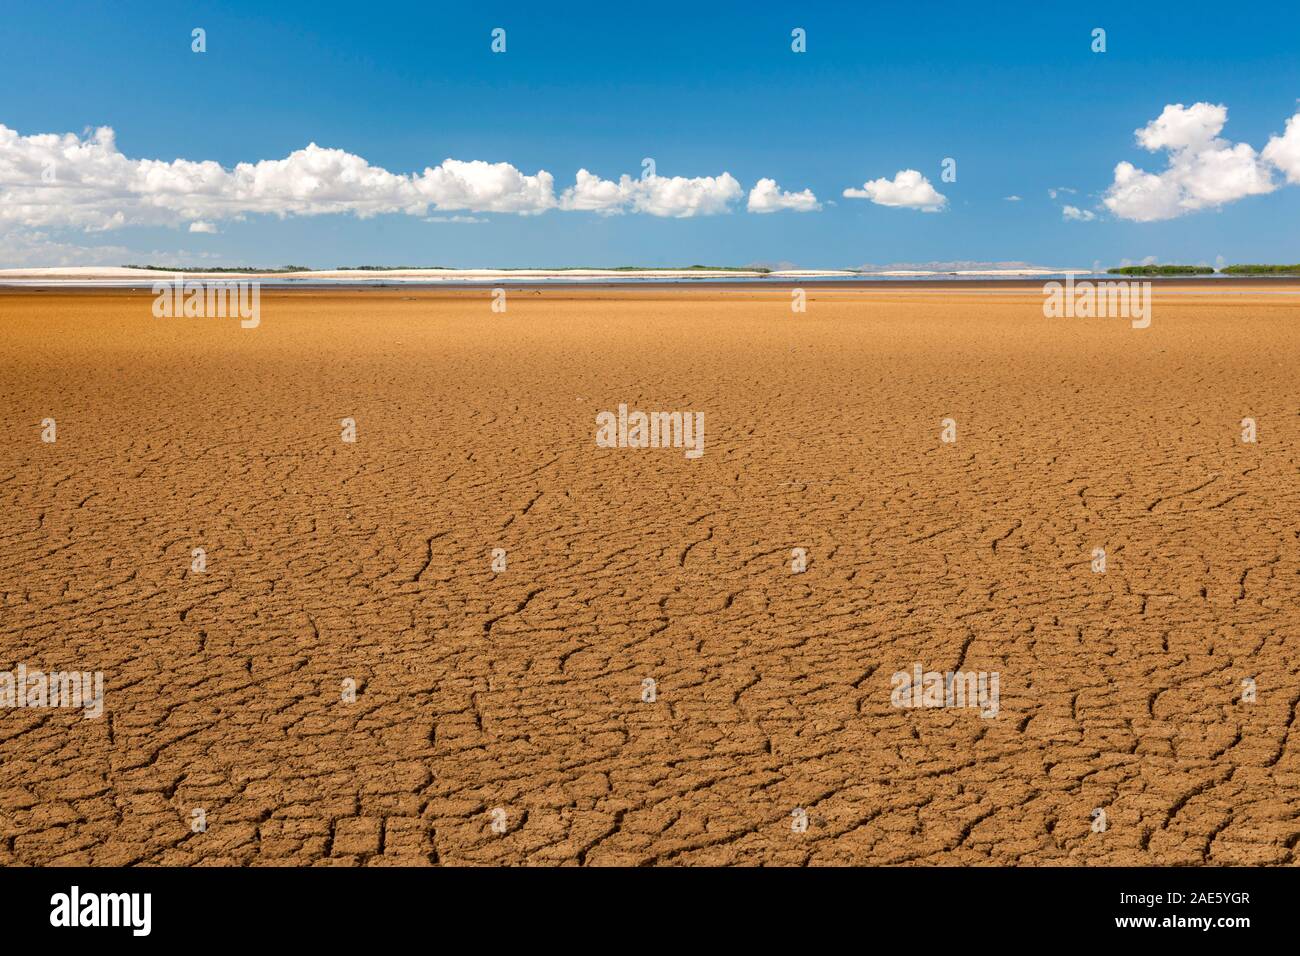 Parched earth in the Grambia region of the Guajira peninsula of northern Colombia. Stock Photo